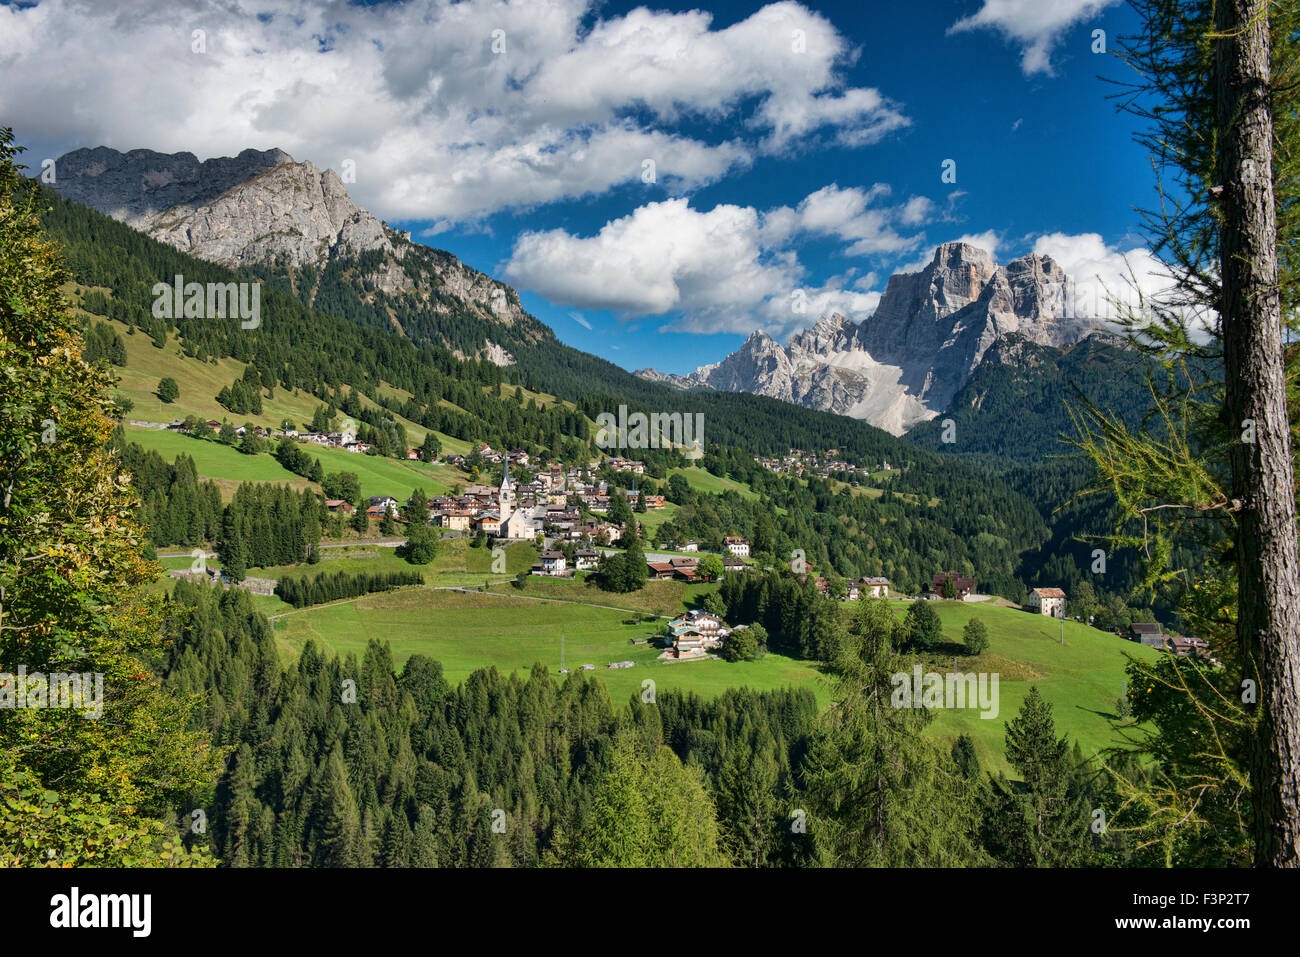 The charming town of Selva di Cadore in the Dolomites, Italy Stock Photo